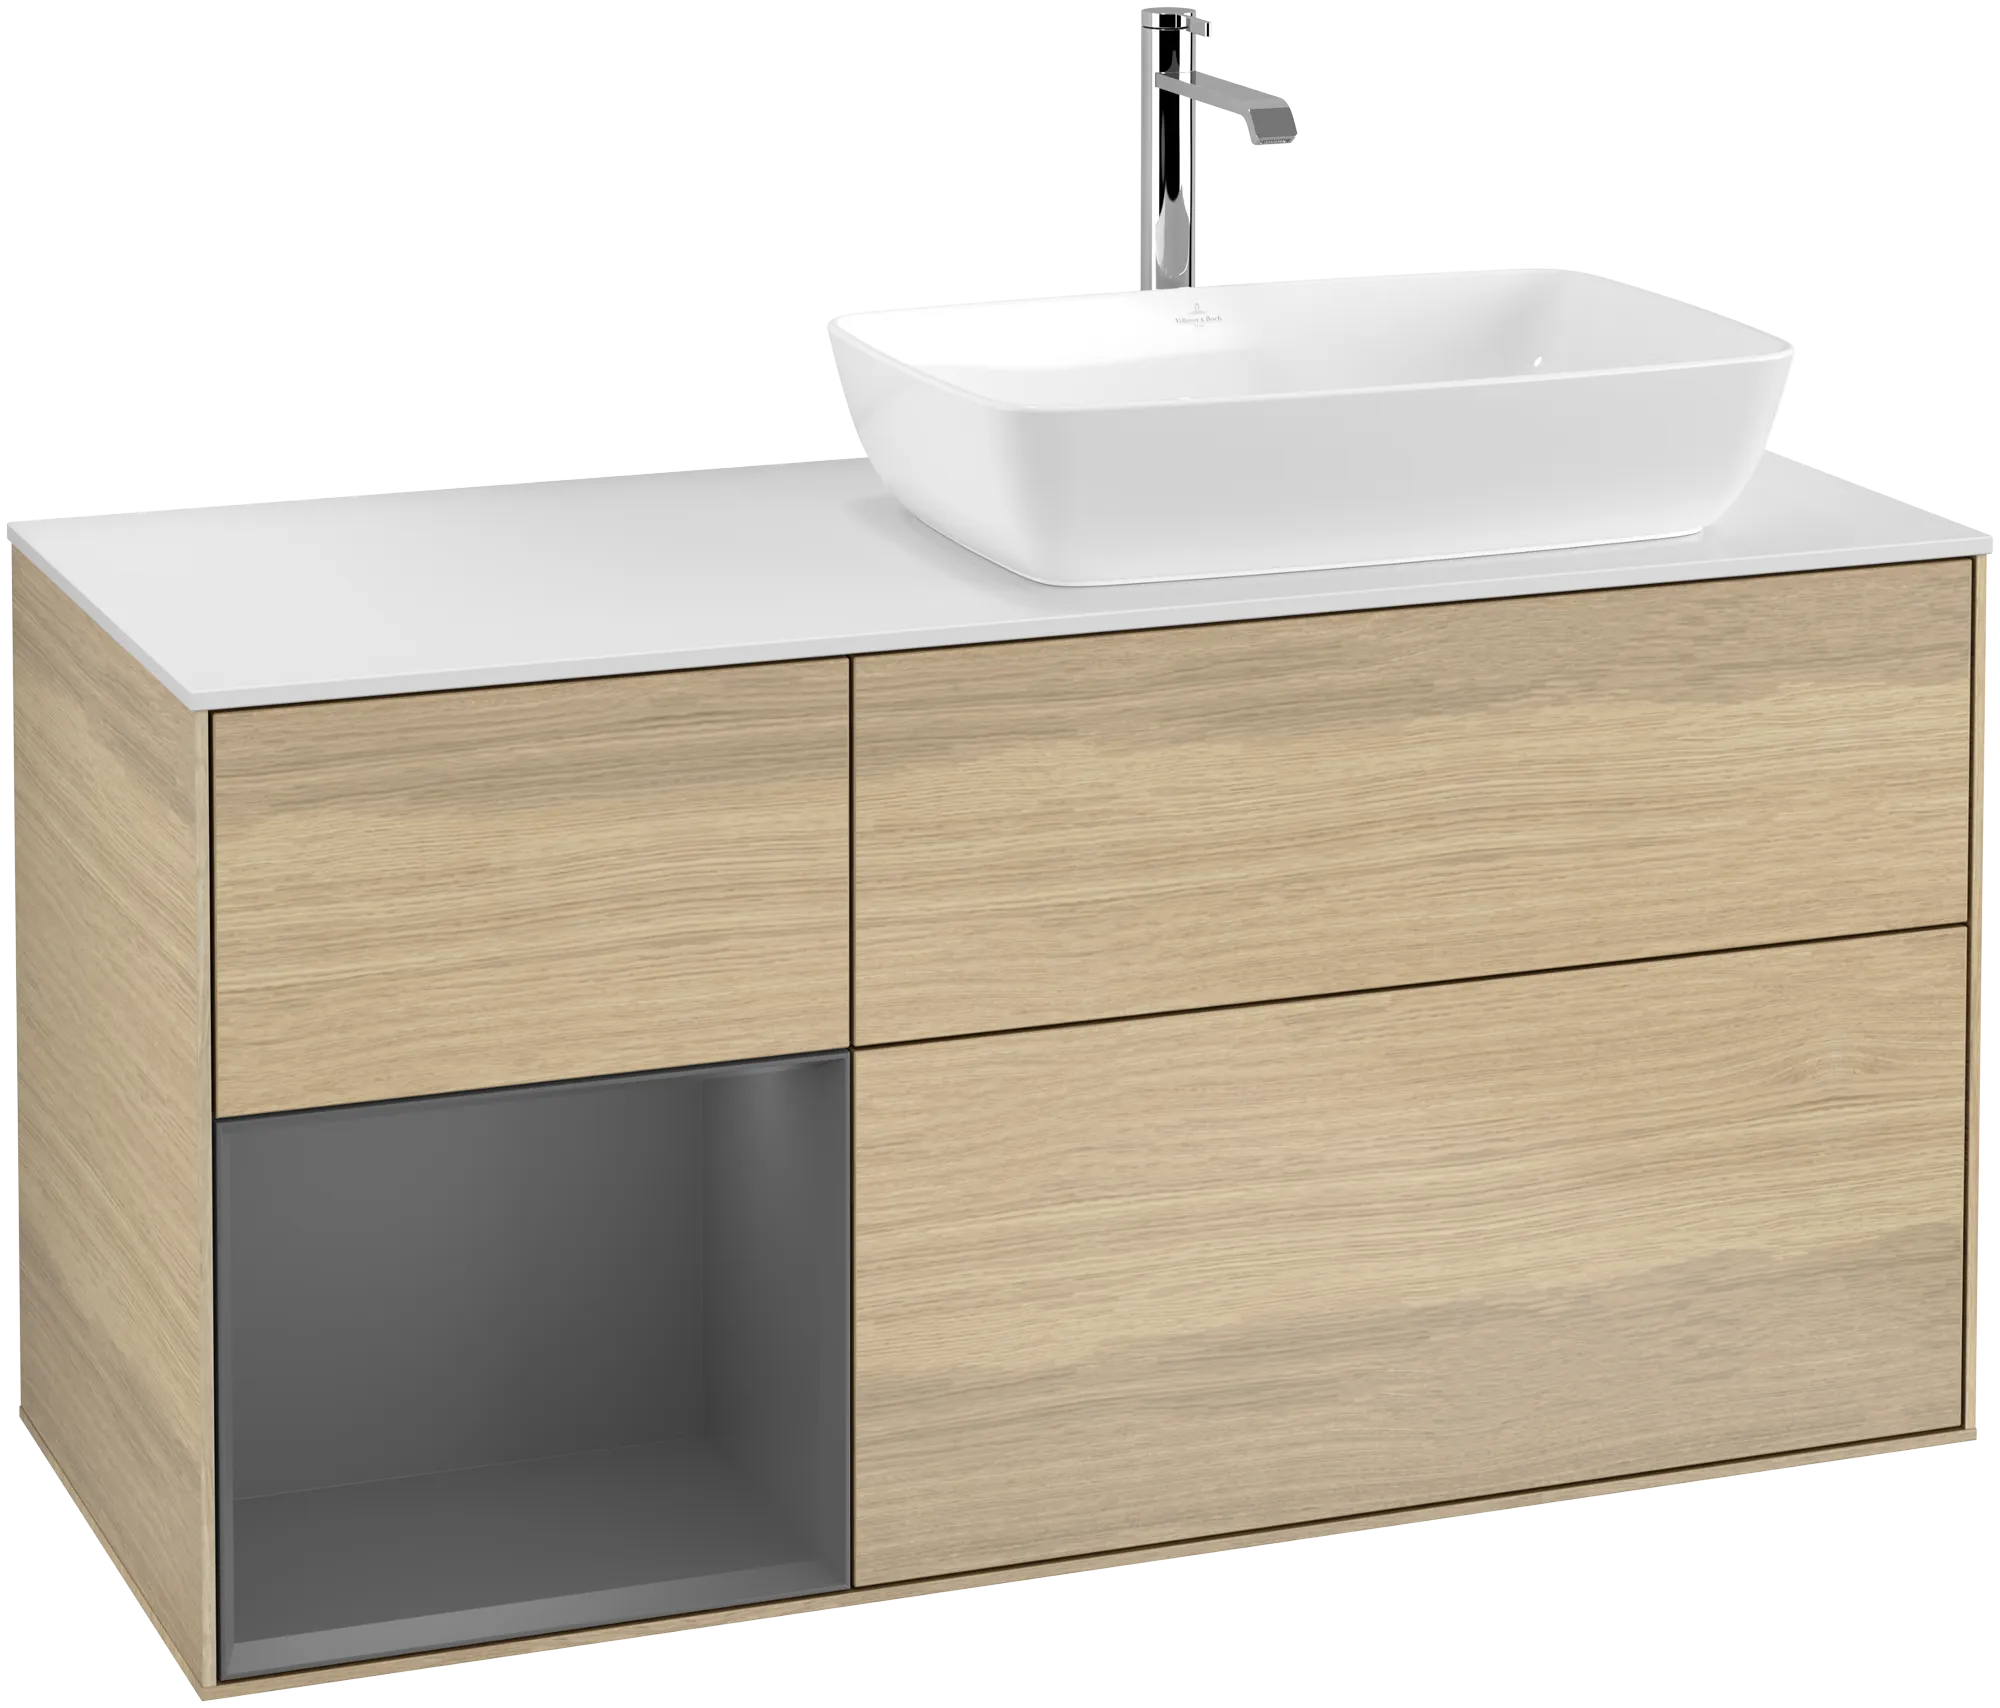 VILLEROY BOCH Finion Vanity unit, with lighting, 3 pull-out compartments, 1200 x 603 x 501 mm, Oak Veneer / Anthracite Matt Lacquer / Glass White Matt #G801GKPC resmi